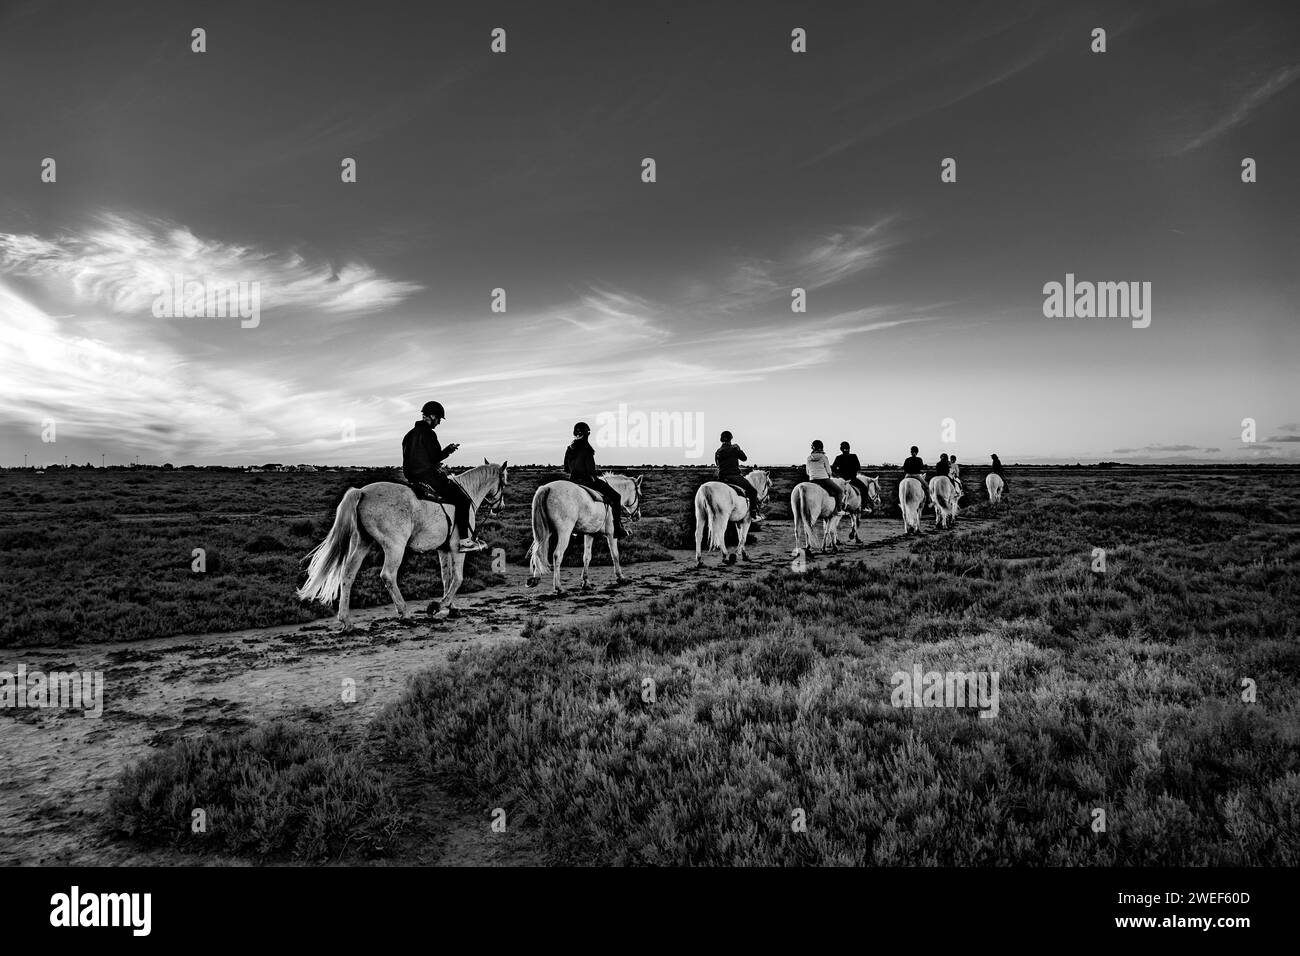 A group of people on horseback riding along a dusty path in a captivating black and white capture Stock Photo